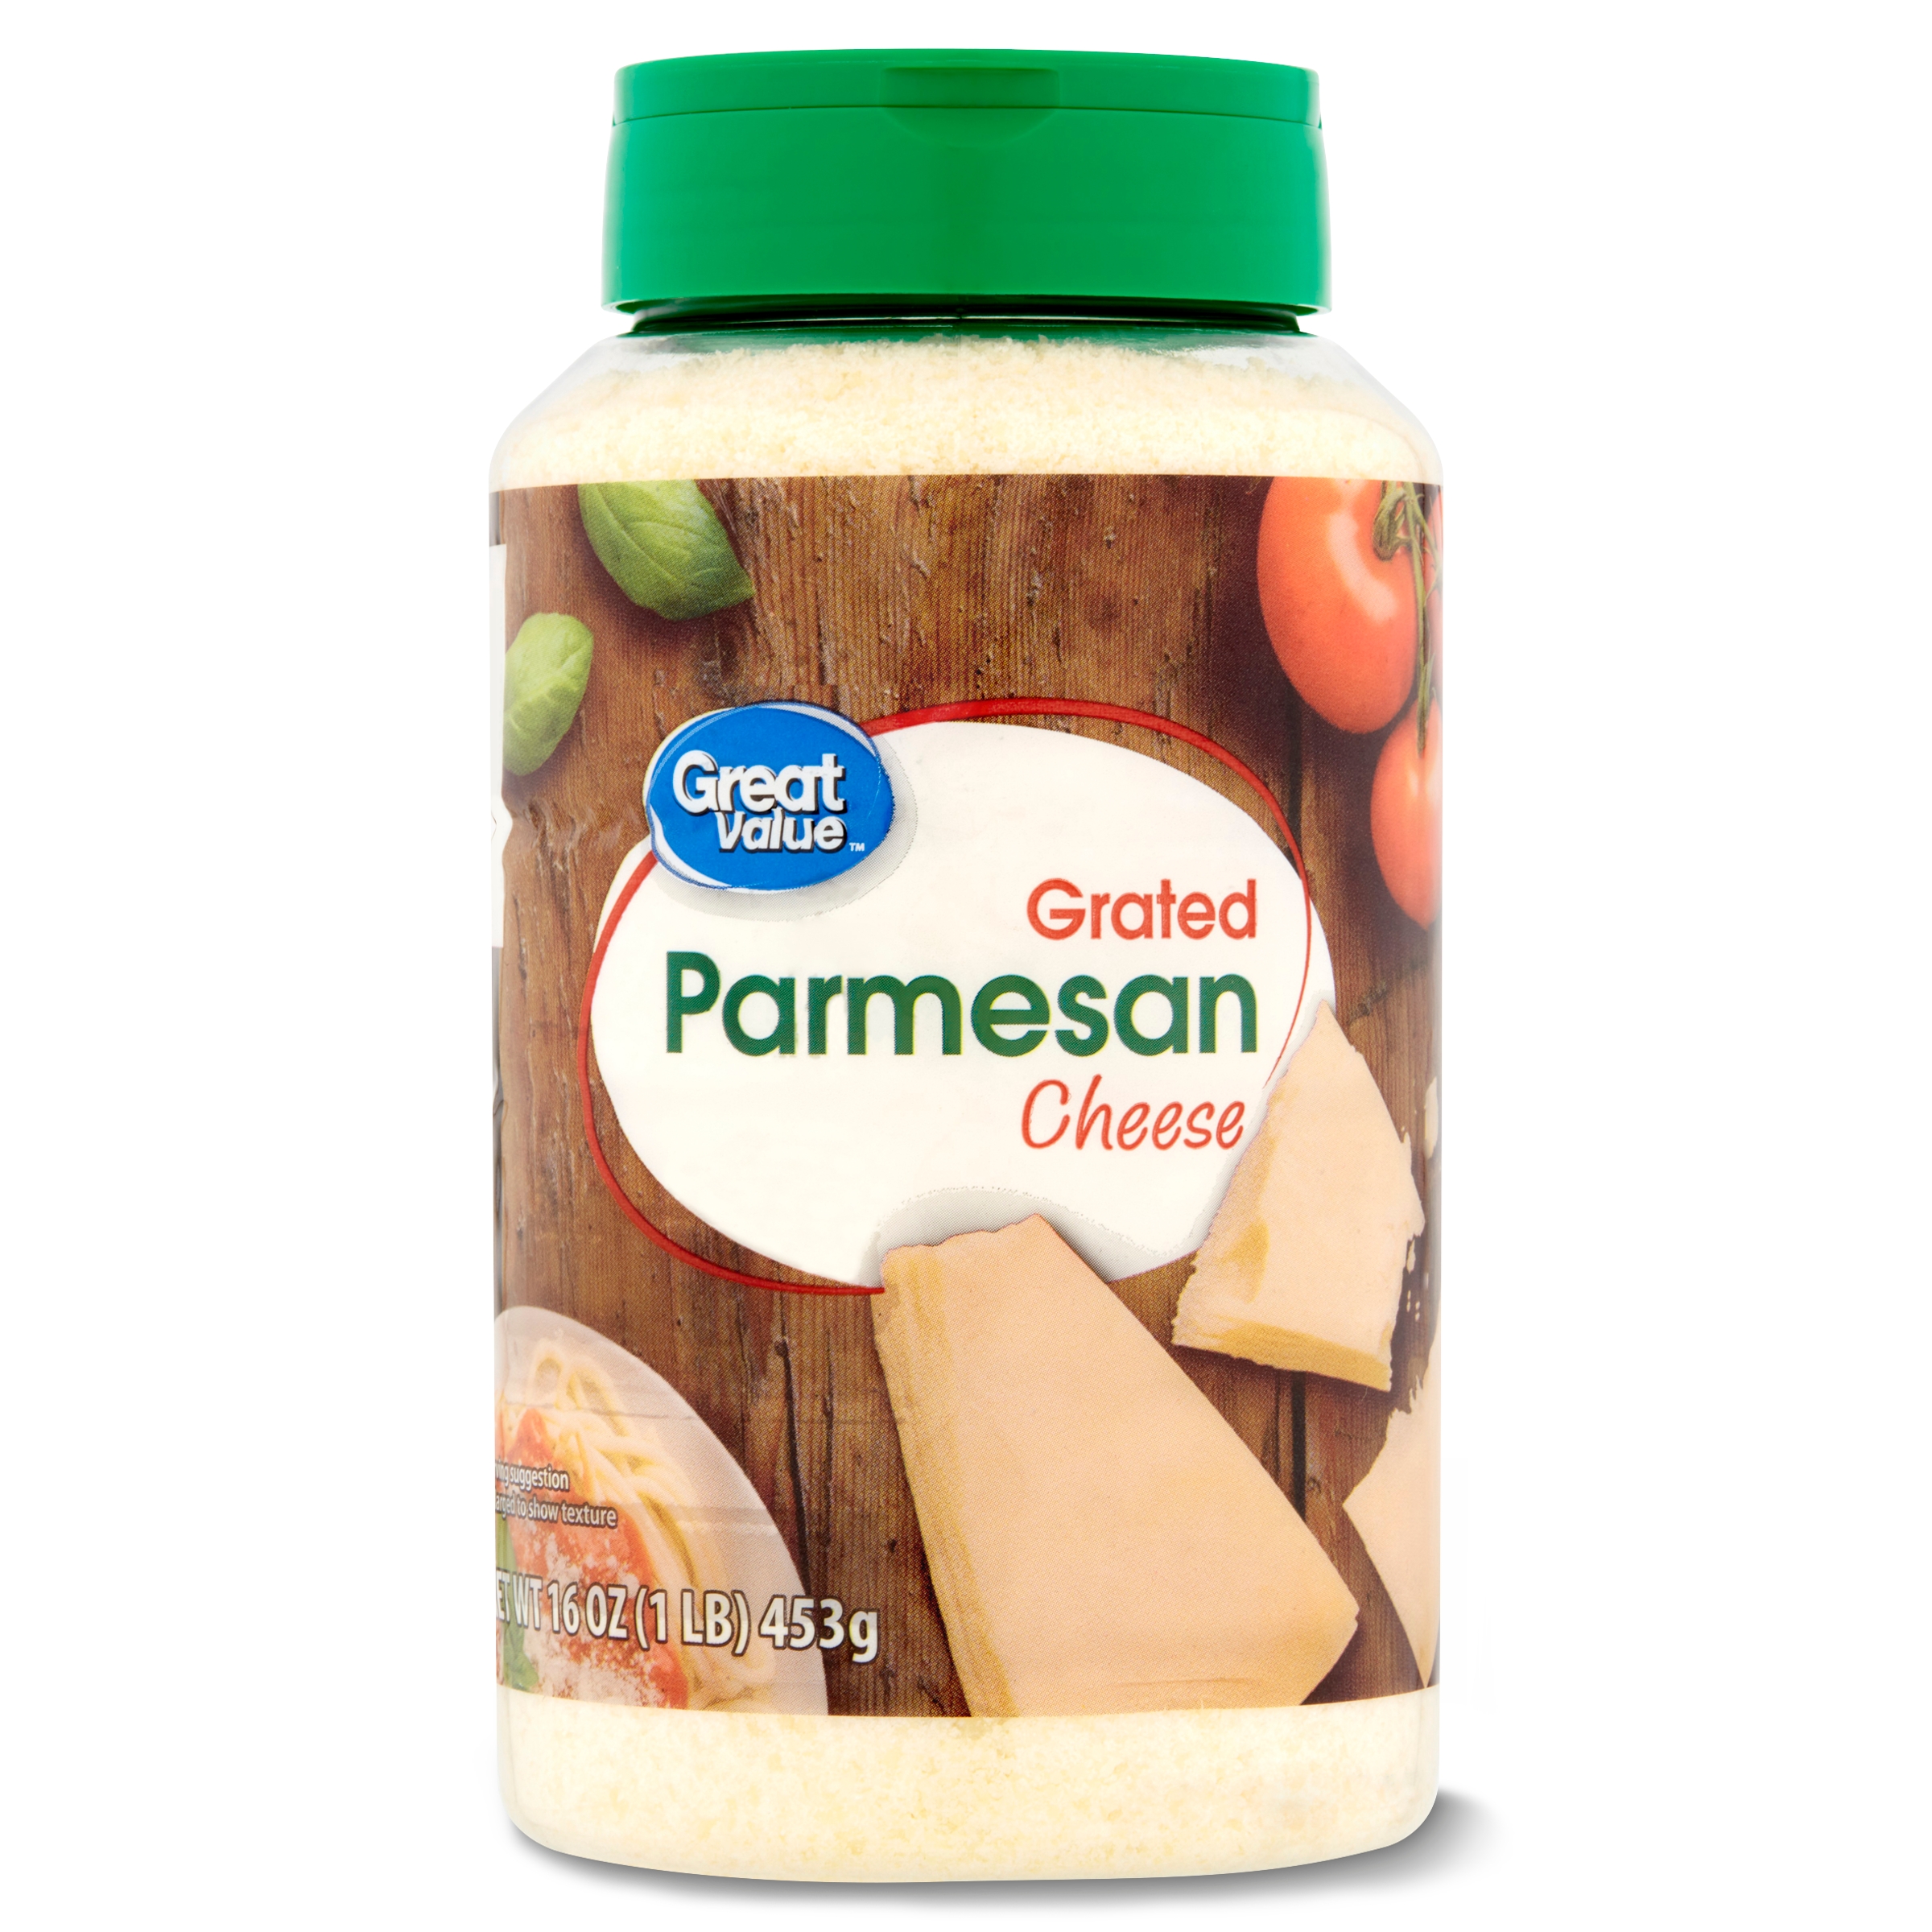 Great Value Grated Parmesan Cheese, 16 oz Bottle - image 1 of 7